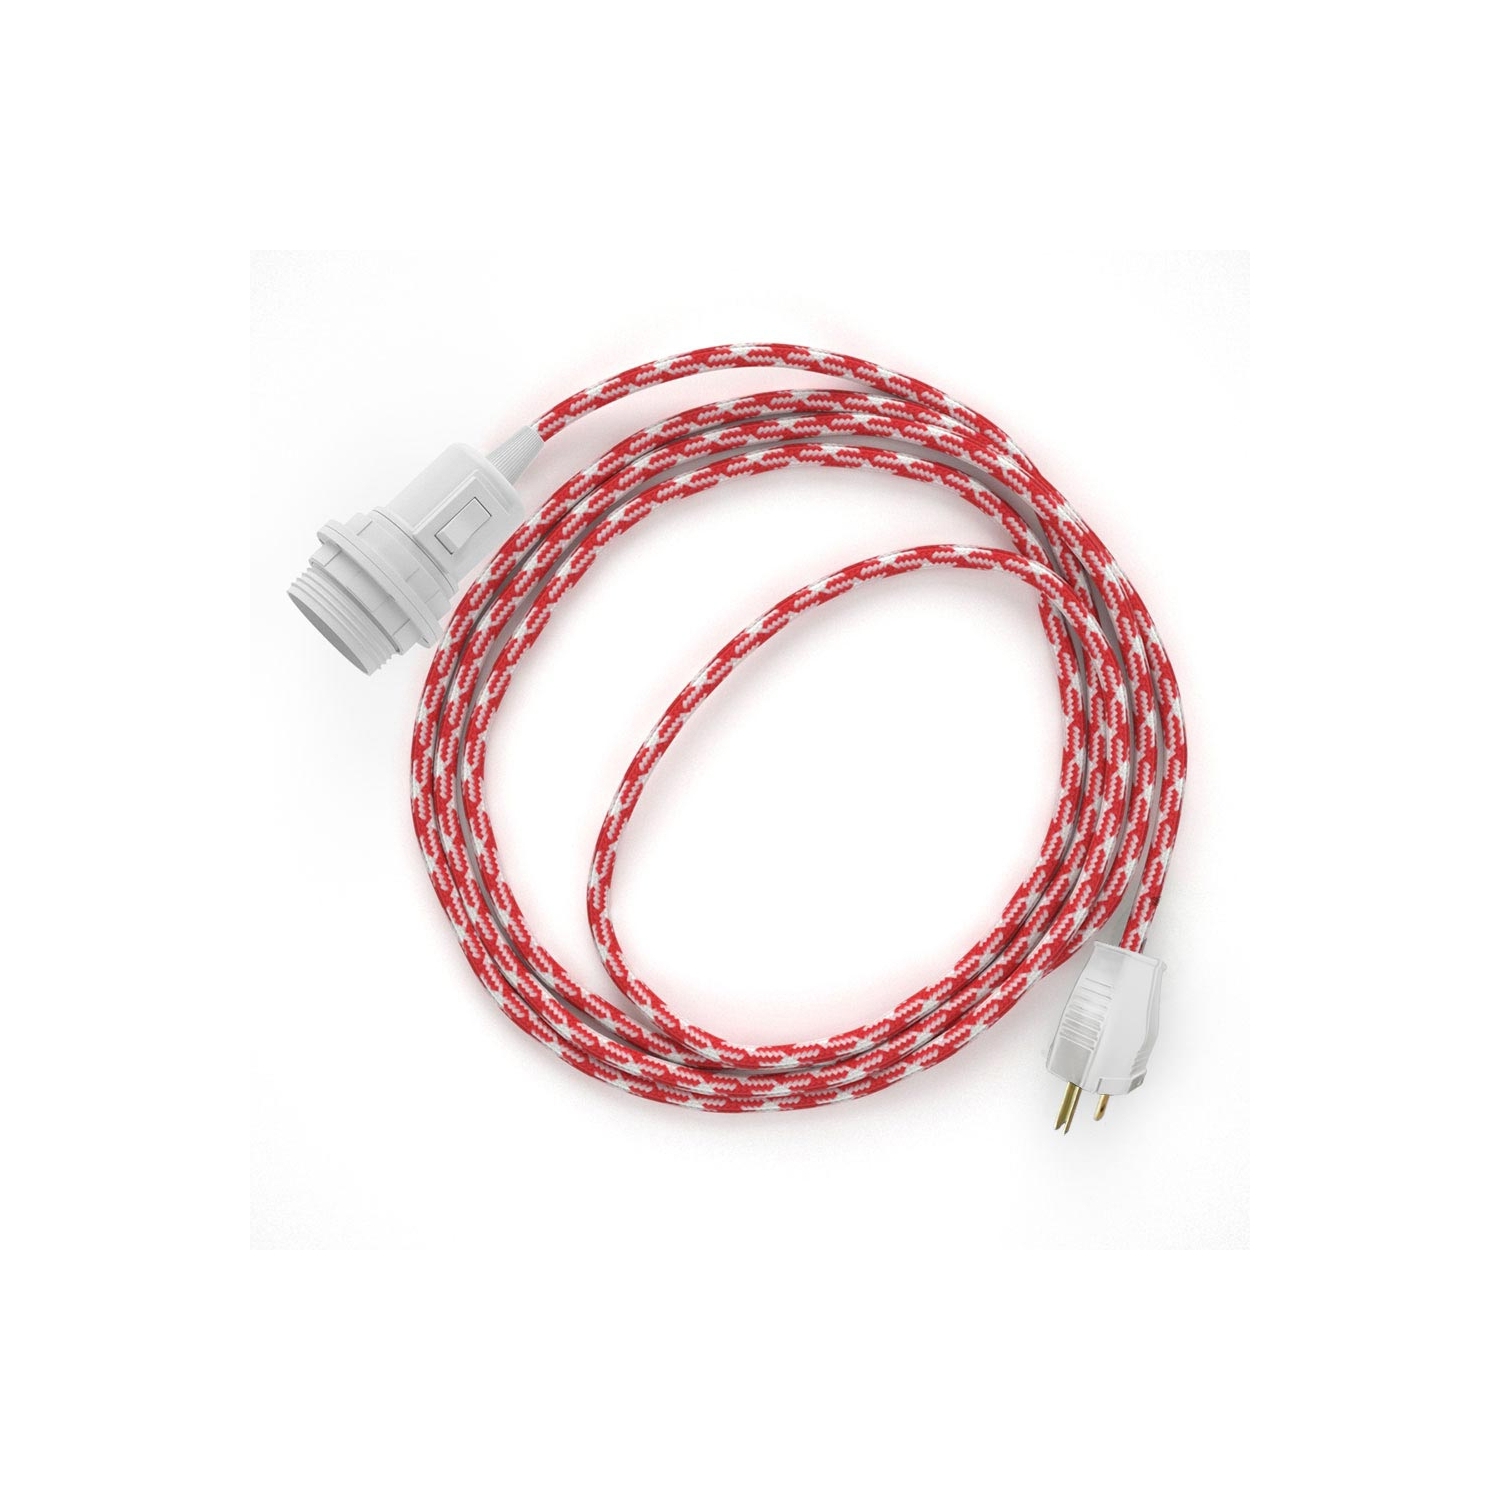 Plug-in Pendant for Lampshade with switch on socket | RP09 Red & White Houndstooth